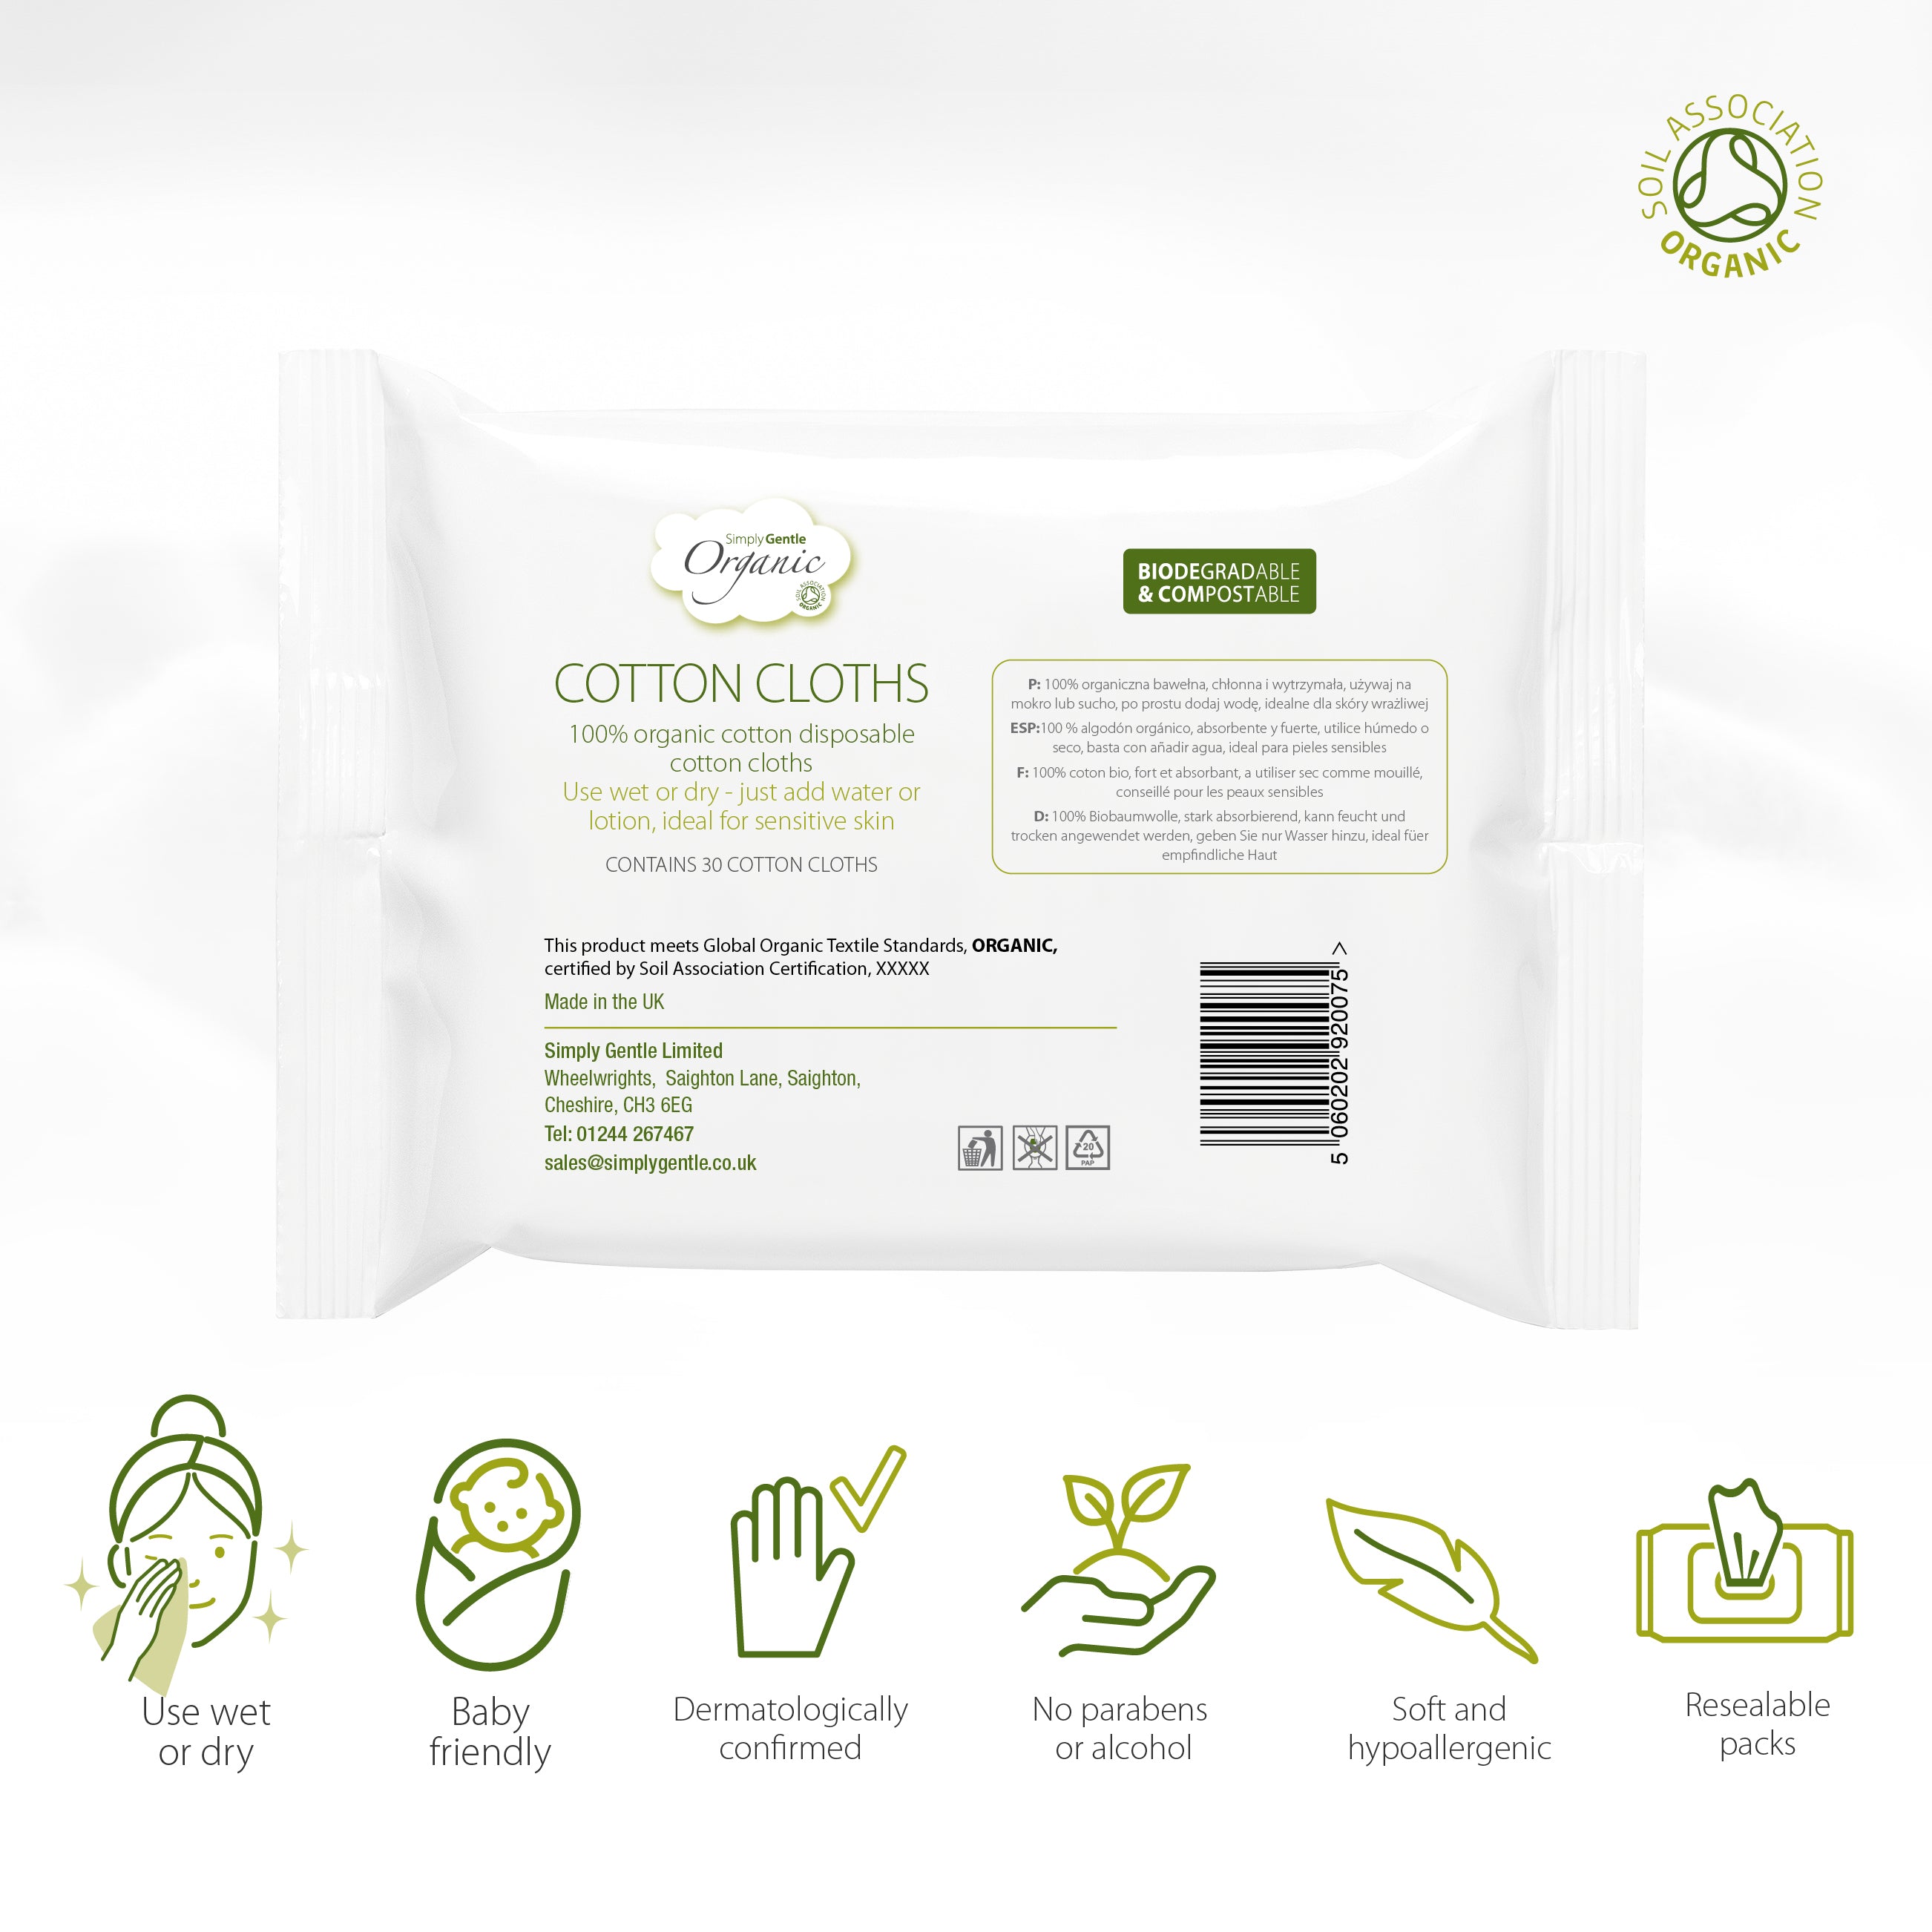 Disposable Organic Cotton Cloths, 100% organic cotton and biodegradable. The absorbant and strong clothes can be used dry or wet. Ideal for sensitive skin, not impregnated - use with your regular cleanser, skin tonic or face wash.1 00% organic cotton wool. Soil Association approved.